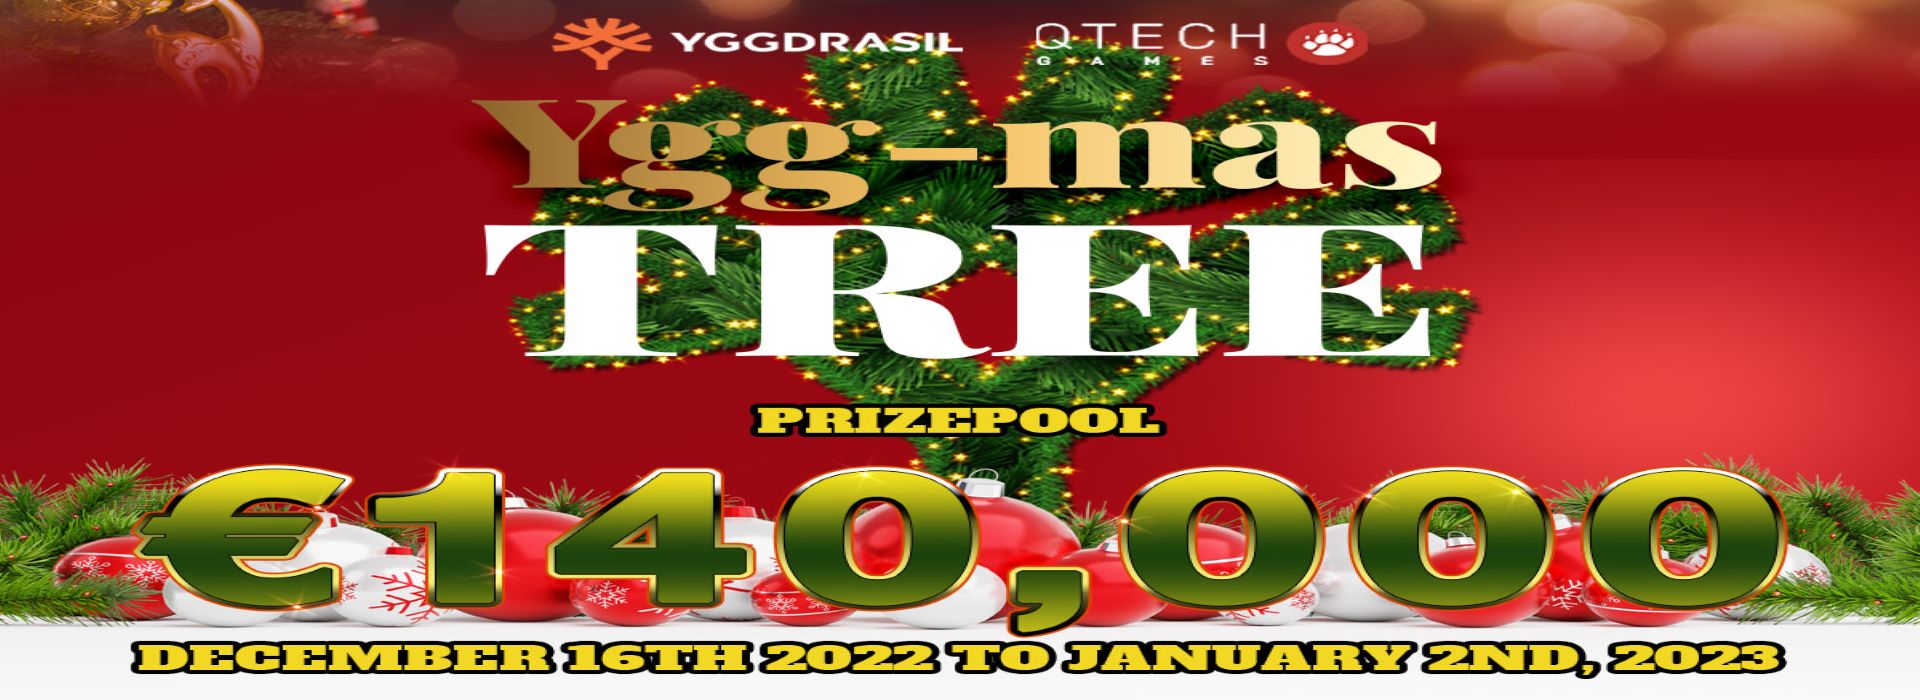 Ho ho ho! Merry Prizes! Yggdrasil invites you to join the fun and excitement of the “Ygg-mas Tree” network campaign series